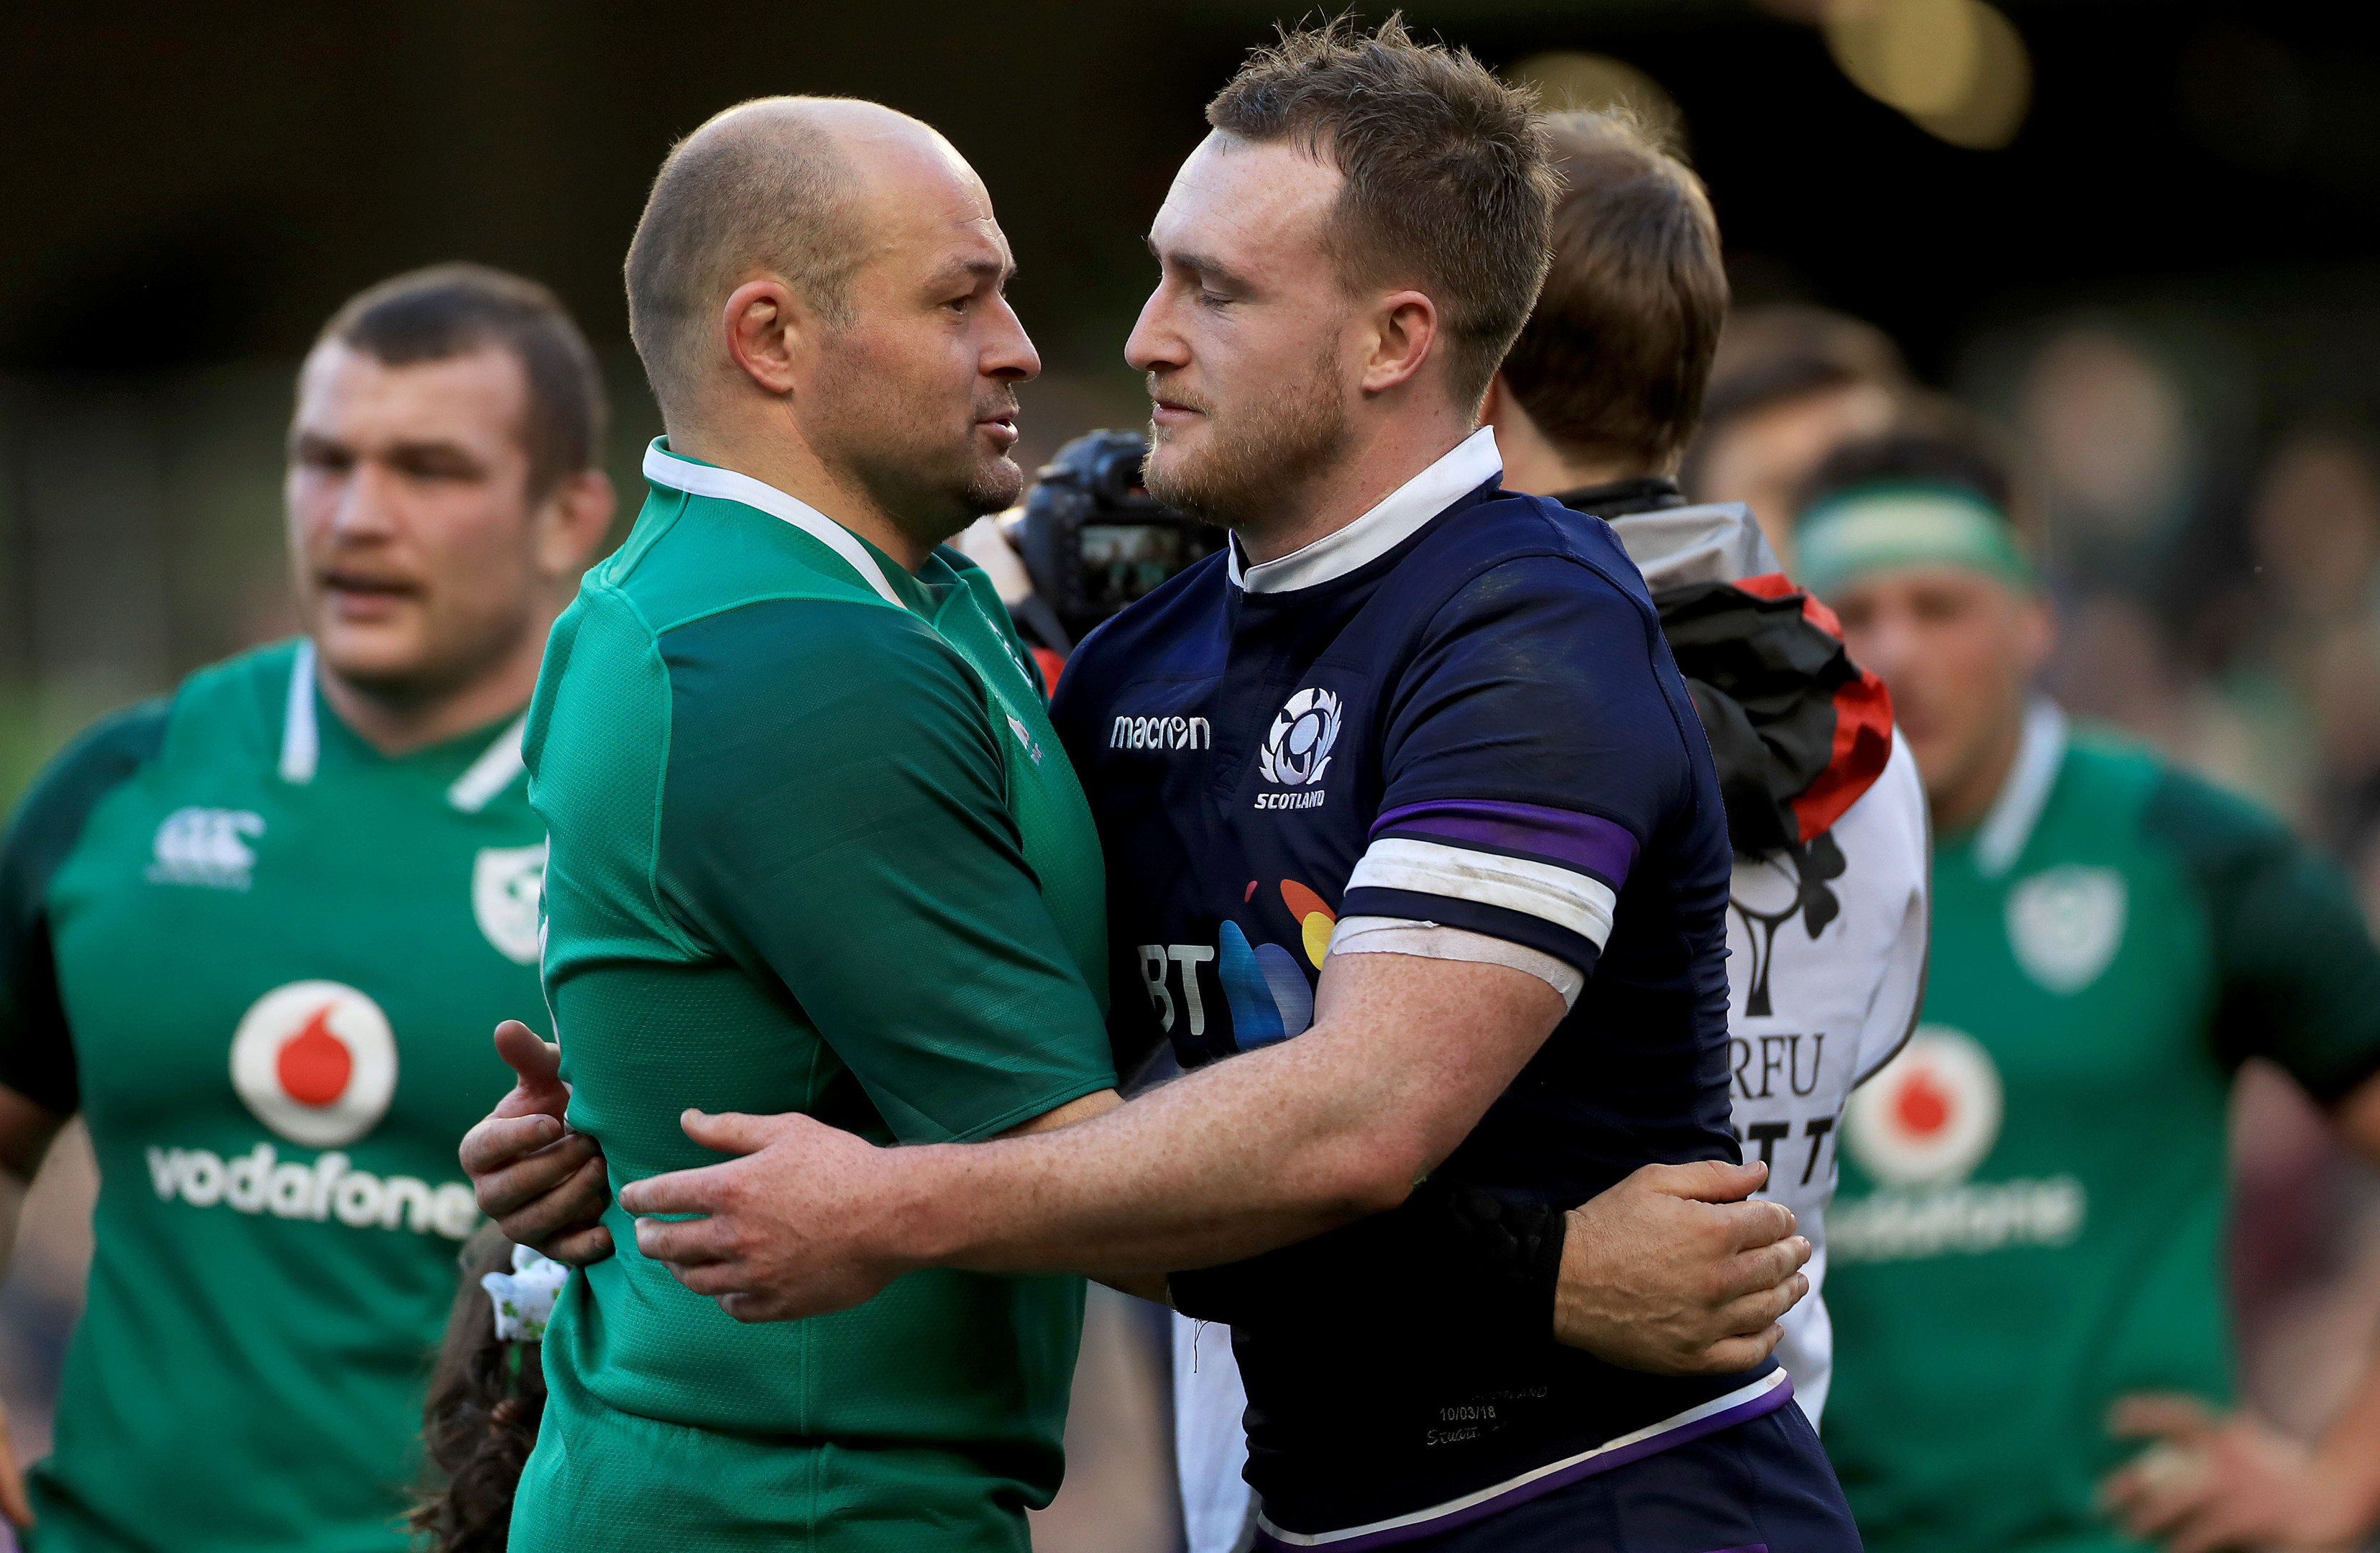 Ireland's Rory Best and Scotland's Stuart Hogg at the end of the NatWest Six Nations match at the Aviva Stadium, Dublin.